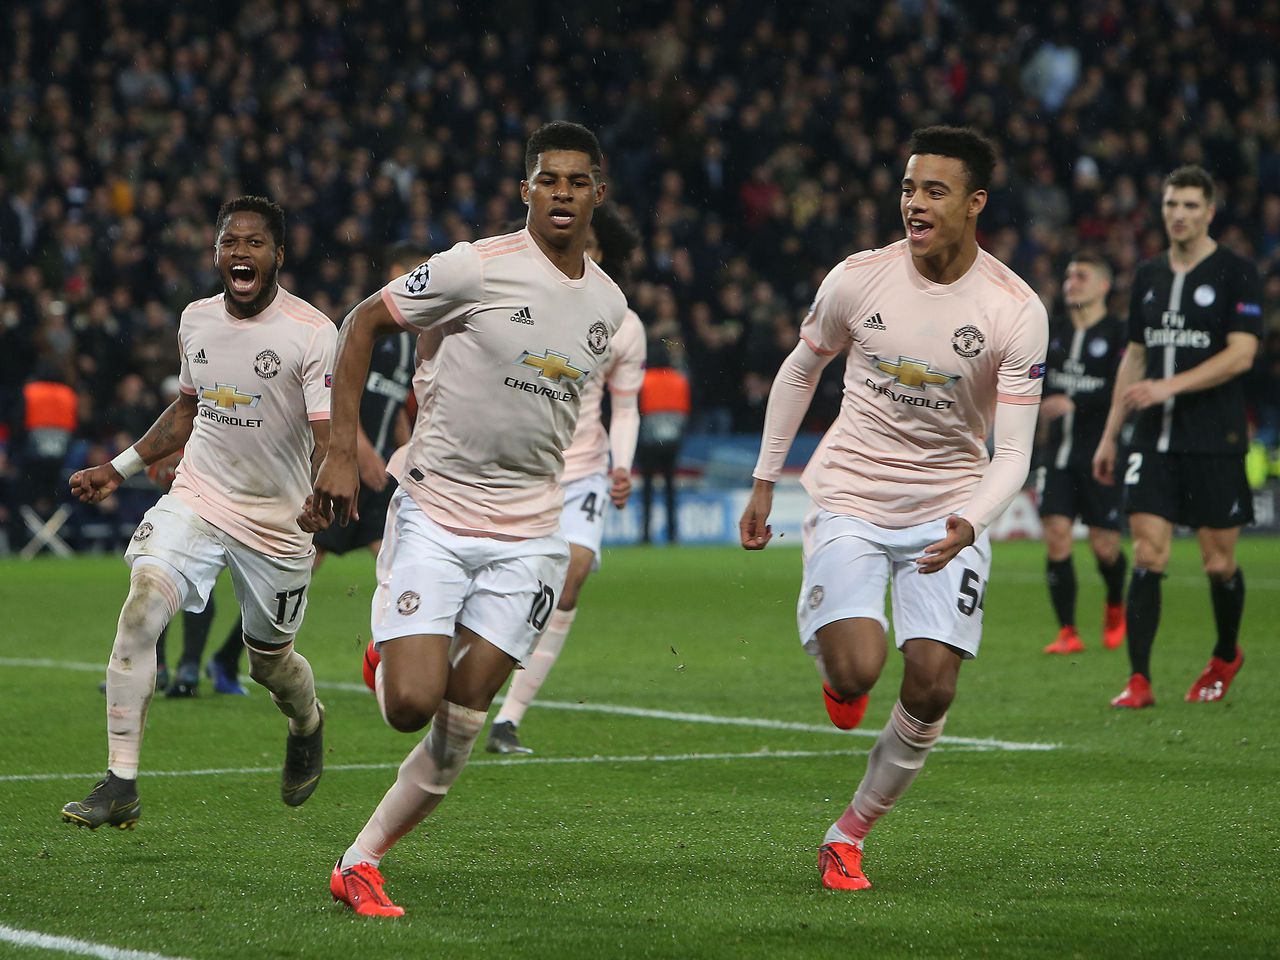 Psg 1 Manchester United 3 Champions League Match Report | Manchester United